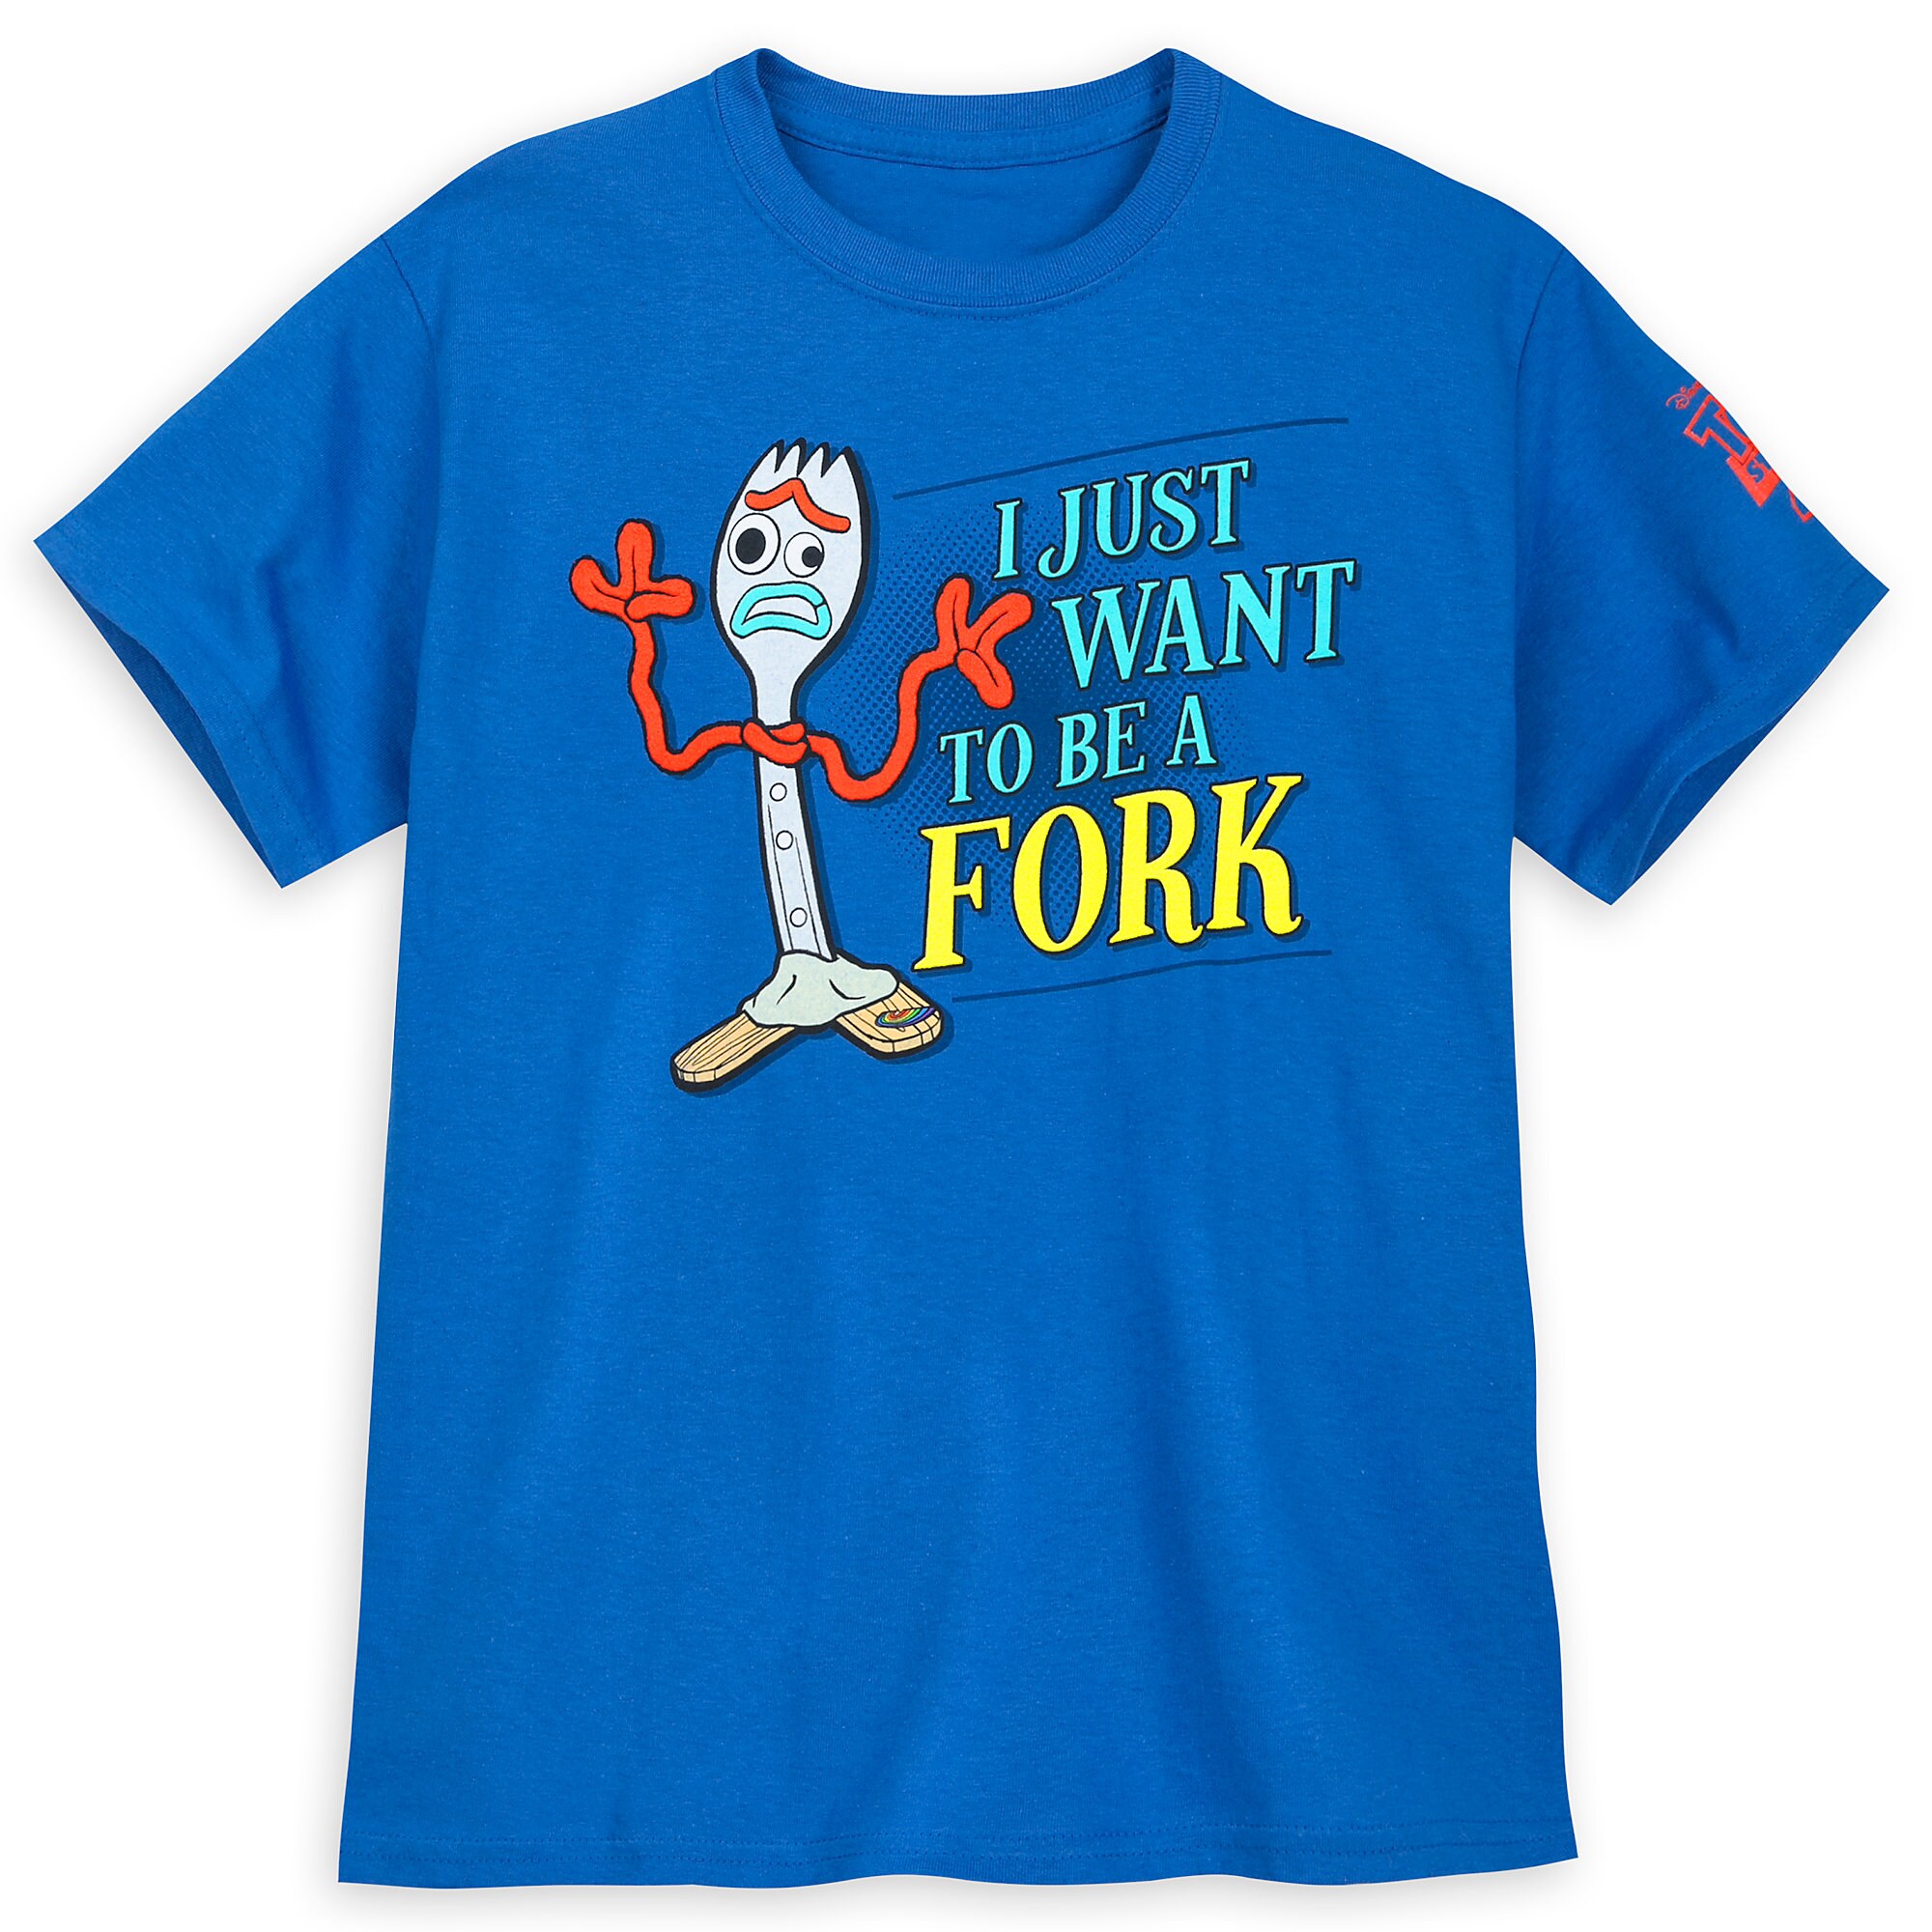 Forky ''I Just Want to Be a Fork'' T-Shirt for Kids - Toy Story 4